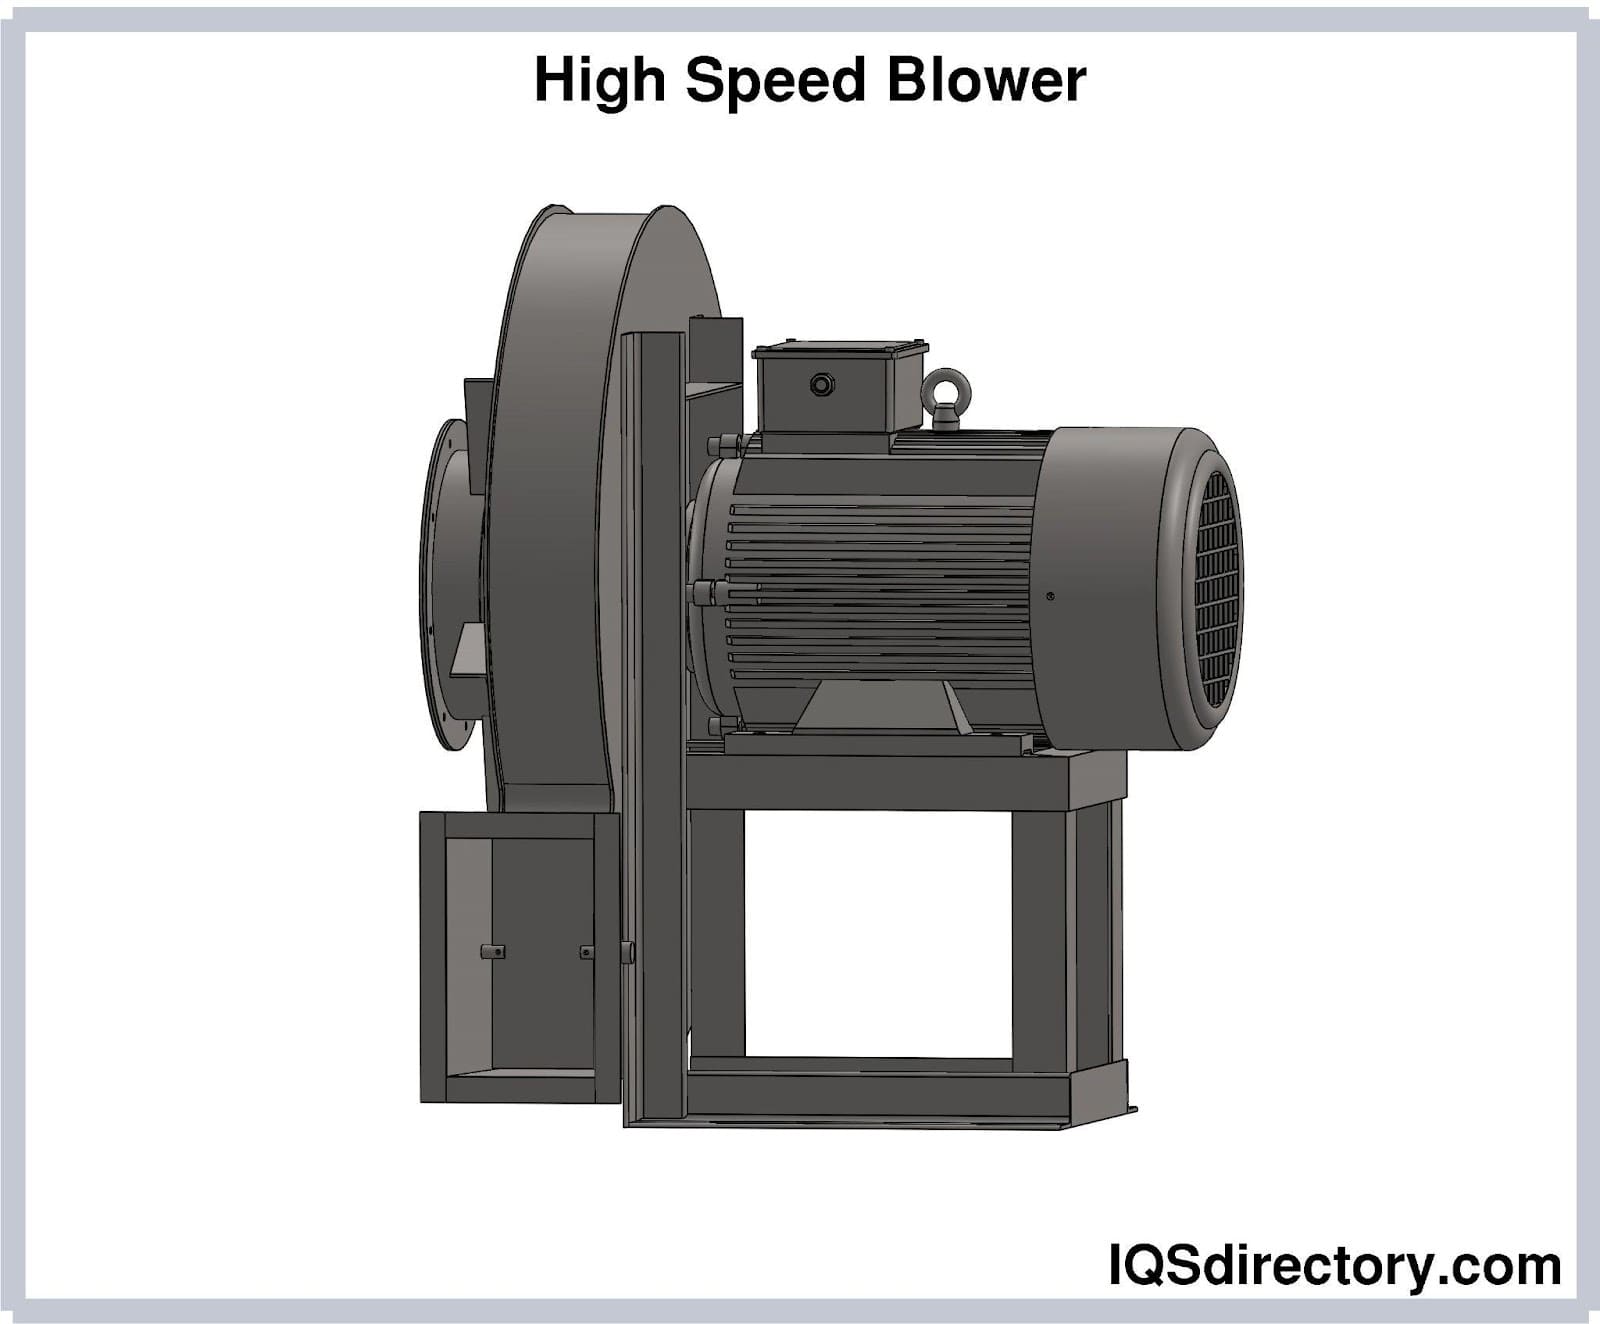 1. Definition of Blower